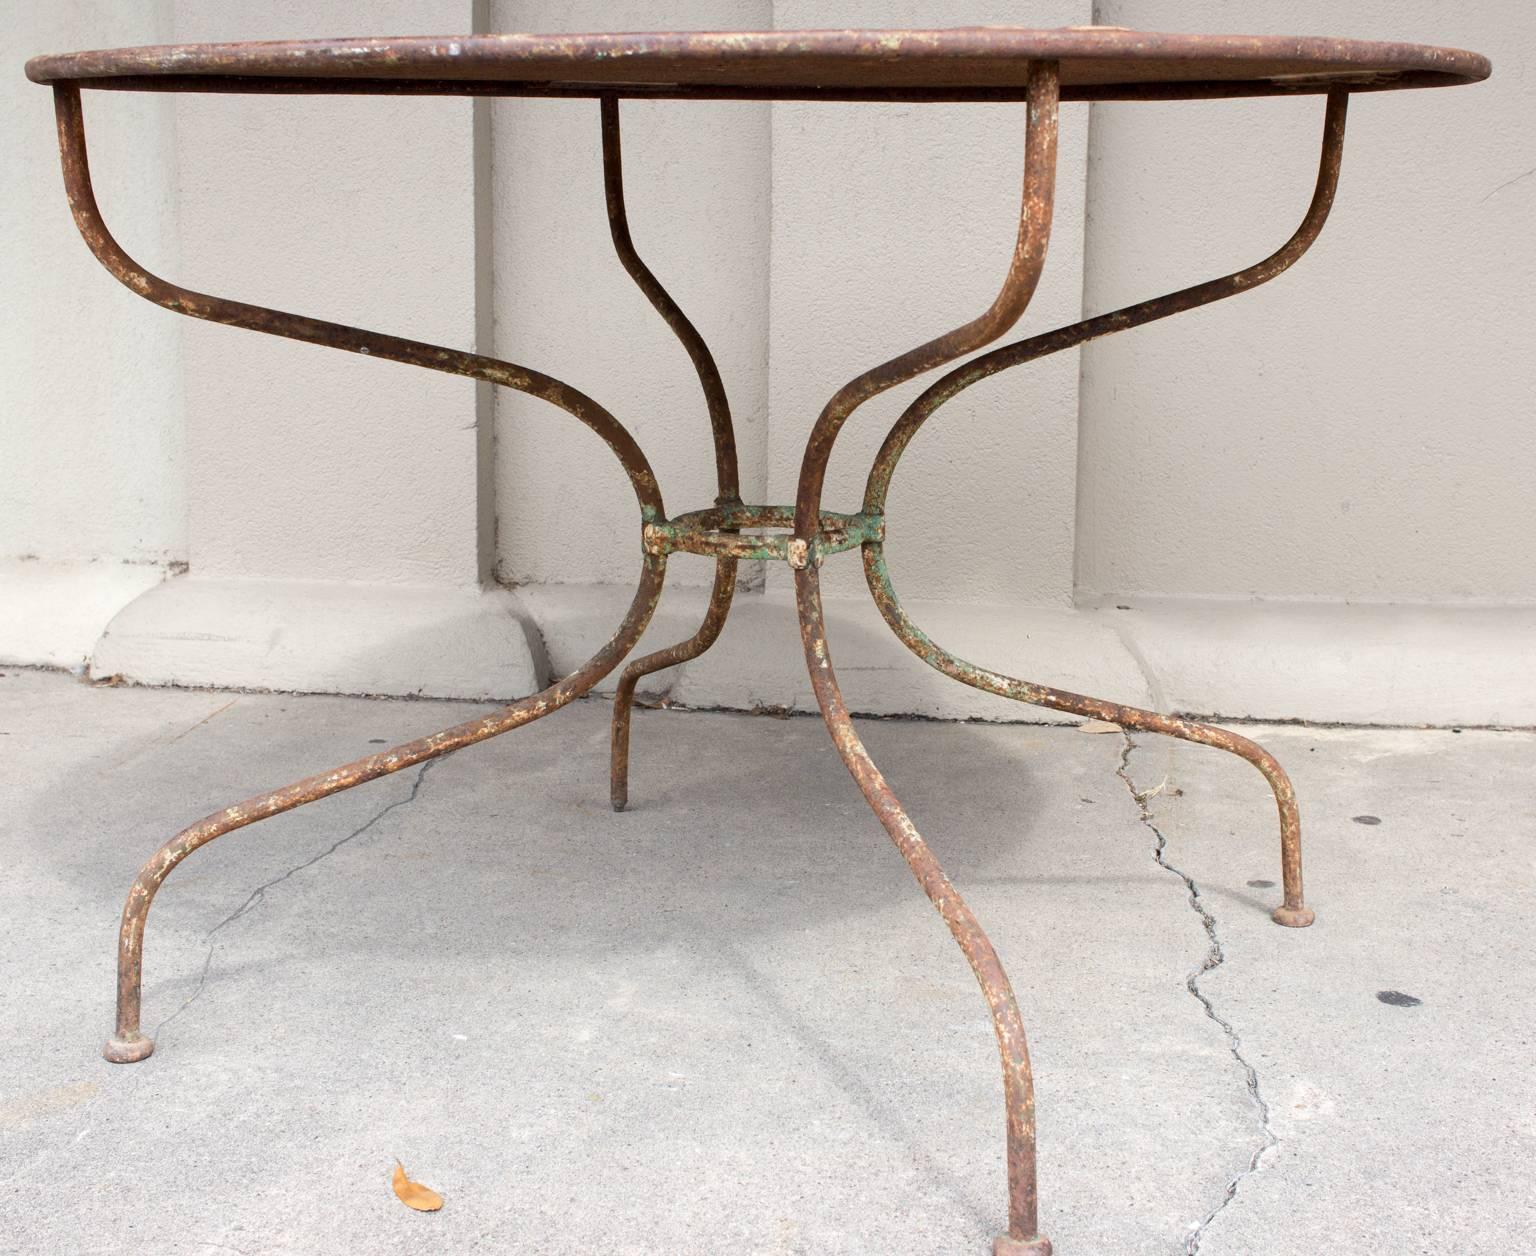 French 1930s Rustic Metal Garden Table Found in France